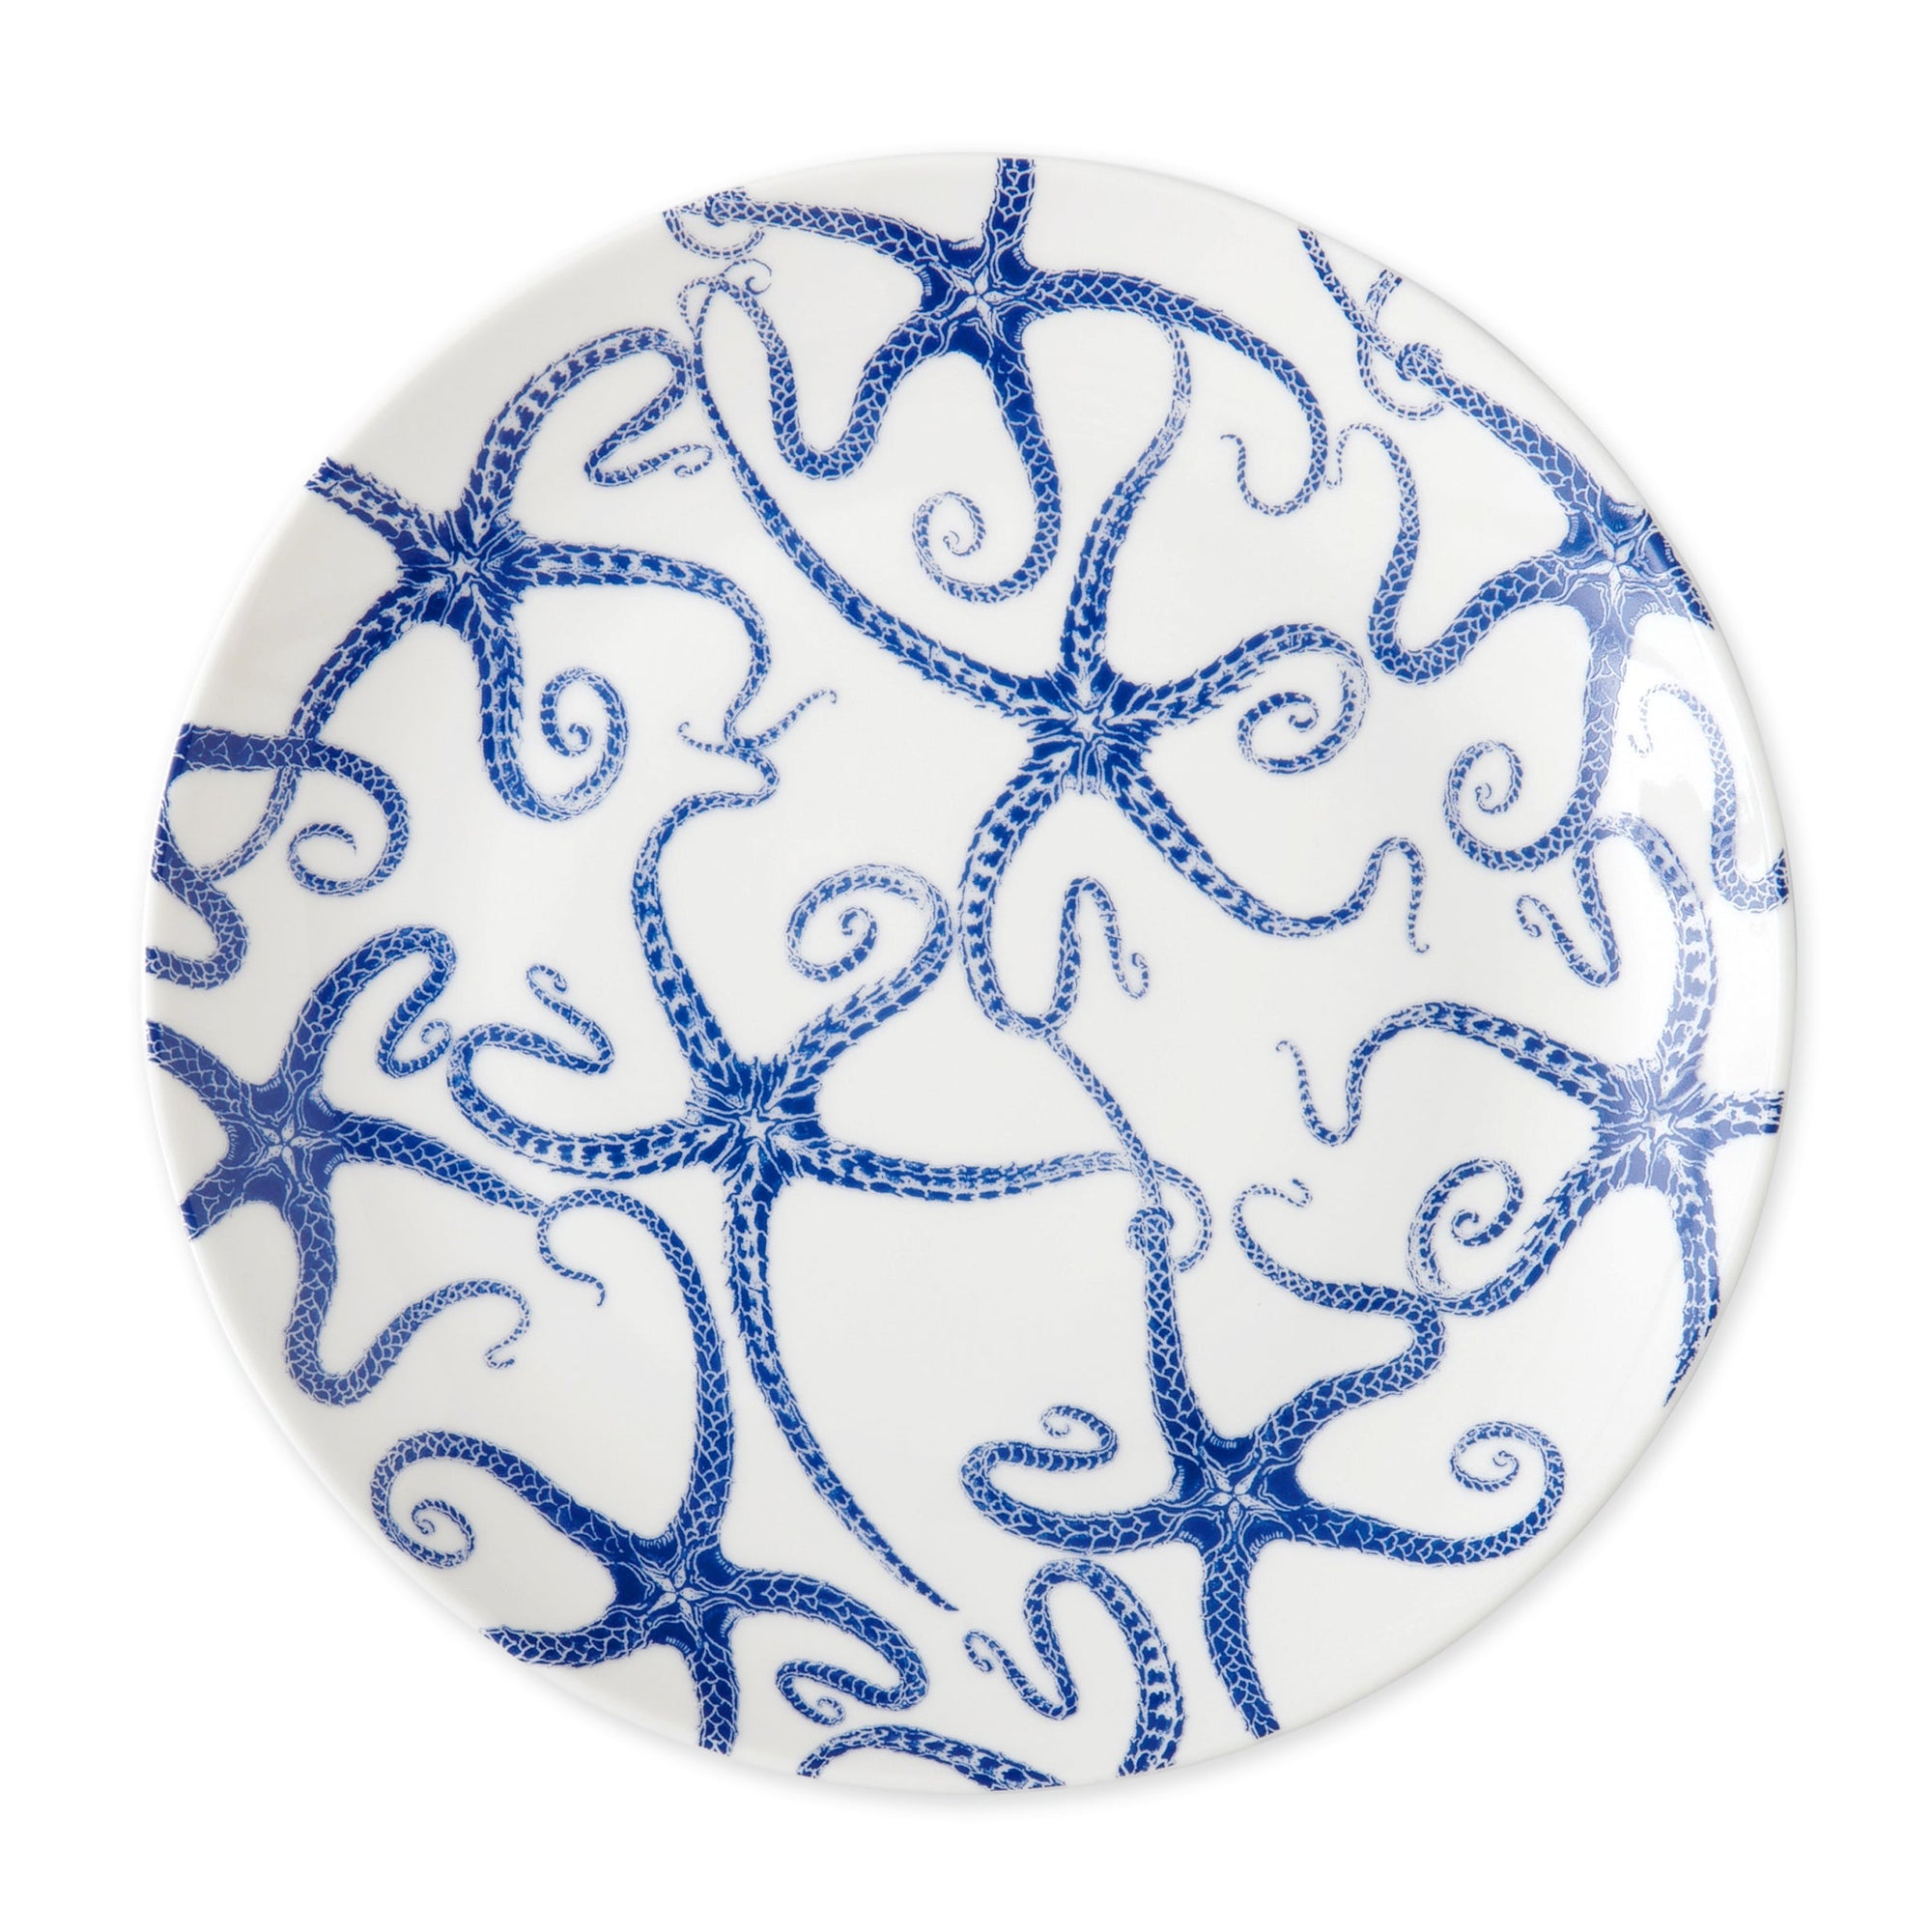 Starfish Blue and White Porcelain Dinnerware set for 2 with 2 Dinner Plates, 2 Salad Plates, and 2 Mugs from Caskata